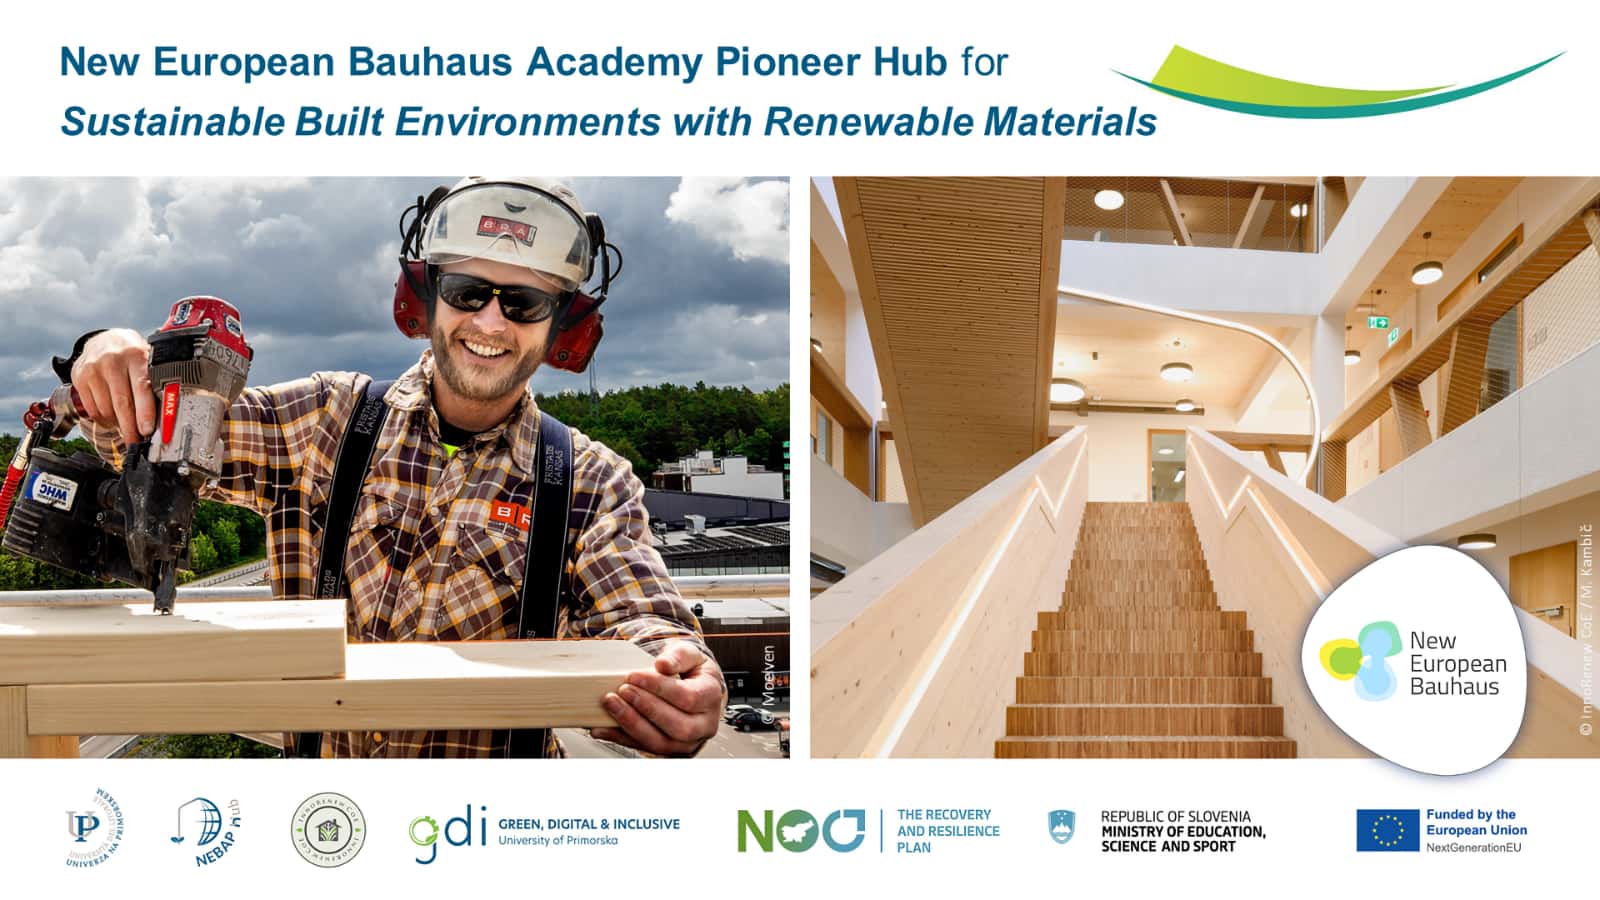 NEB Academy Pioneer Hub in Slovenia launched